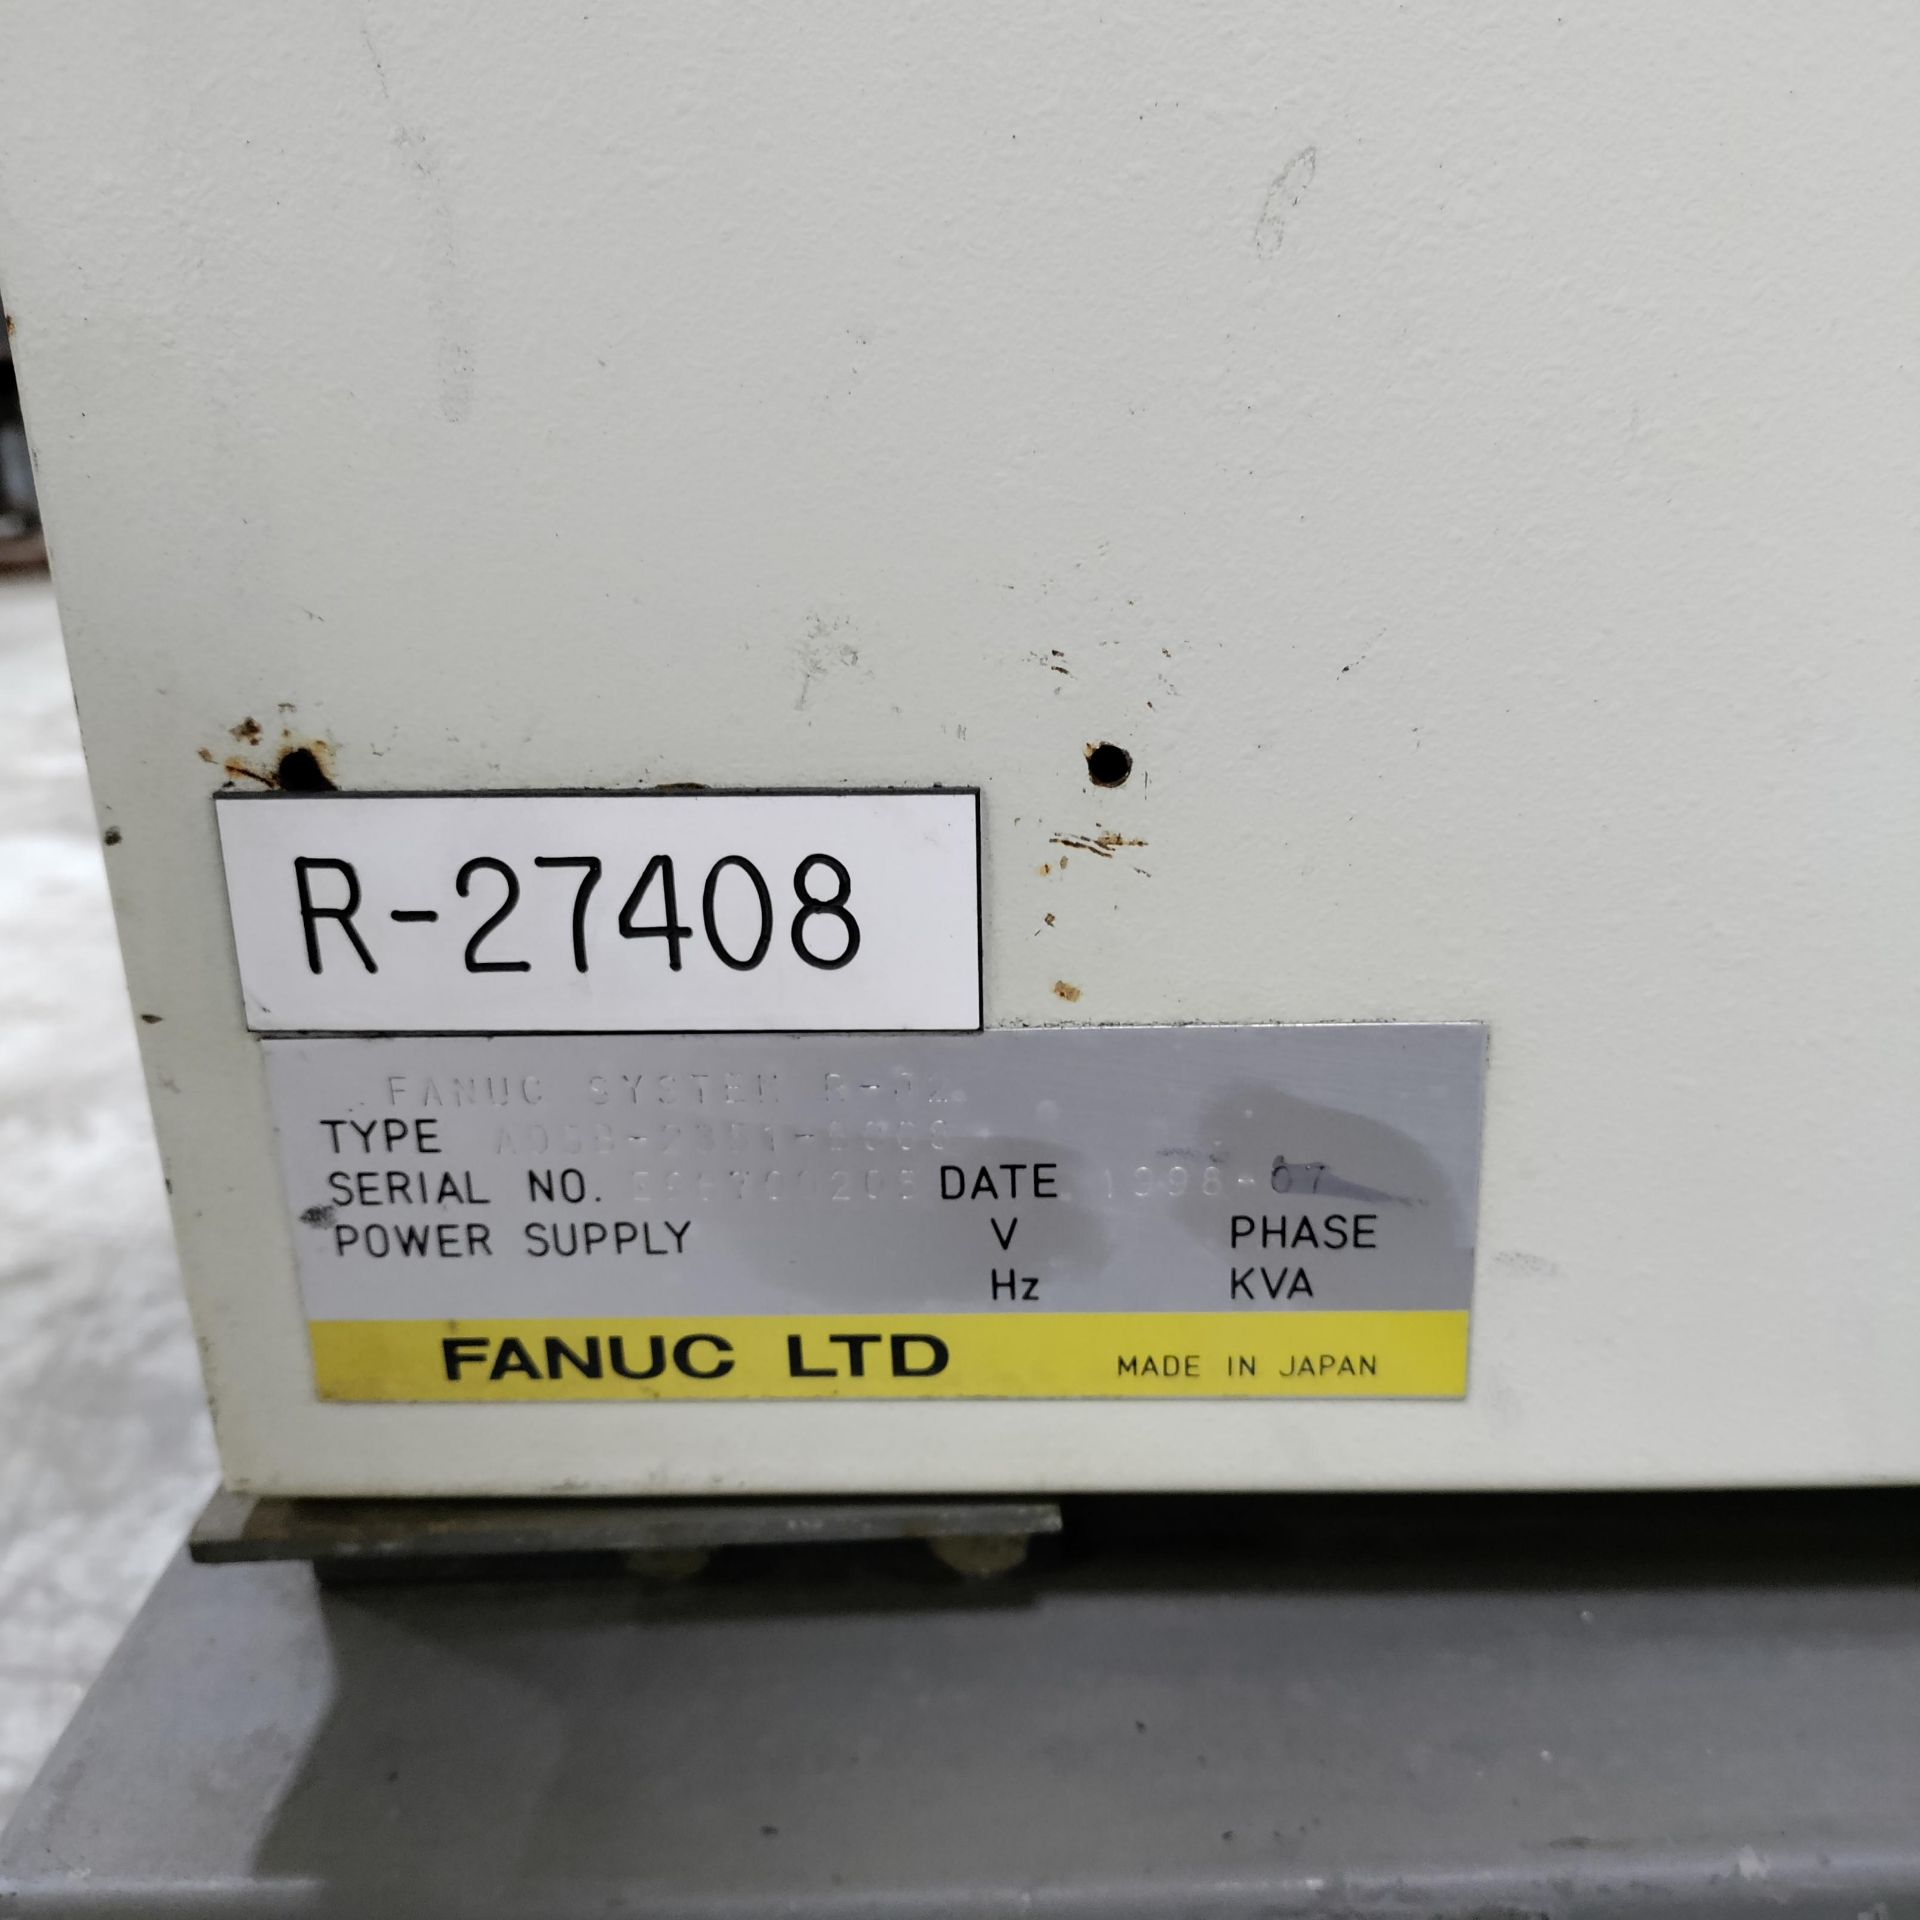 FANUC ROBOT S-420iW SN 27408 WITH R-J2 CONTROL - Image 6 of 7